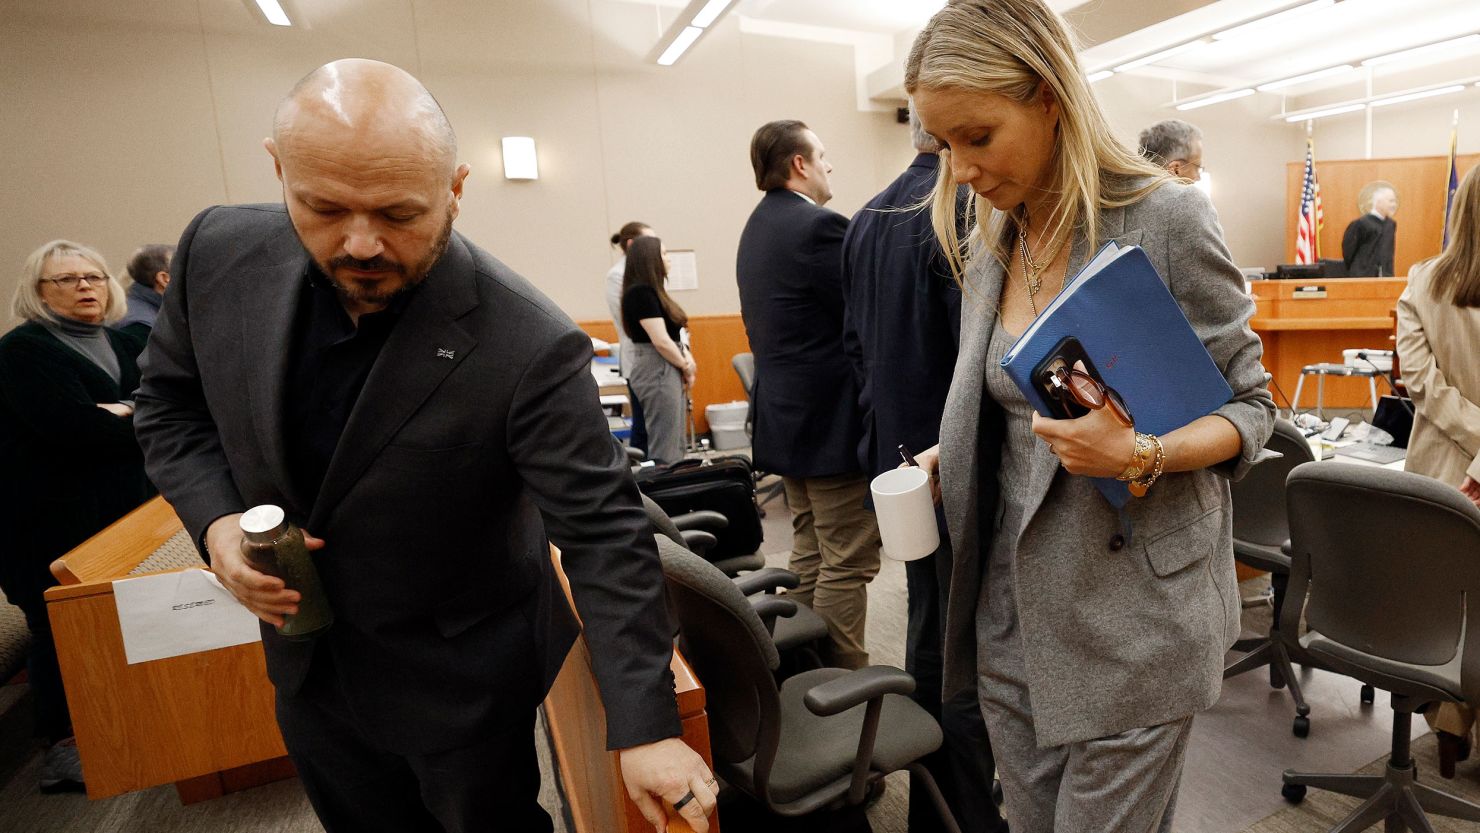 Gwyneth Paltrow exits the court on March 23 in Park City, Utah. Terry Sanderson is suing Paltrow , claiming she recklessly crashed into him while the two were skiing on a beginner run at Deer Valley Resort in Park City, Utah in 2016. 